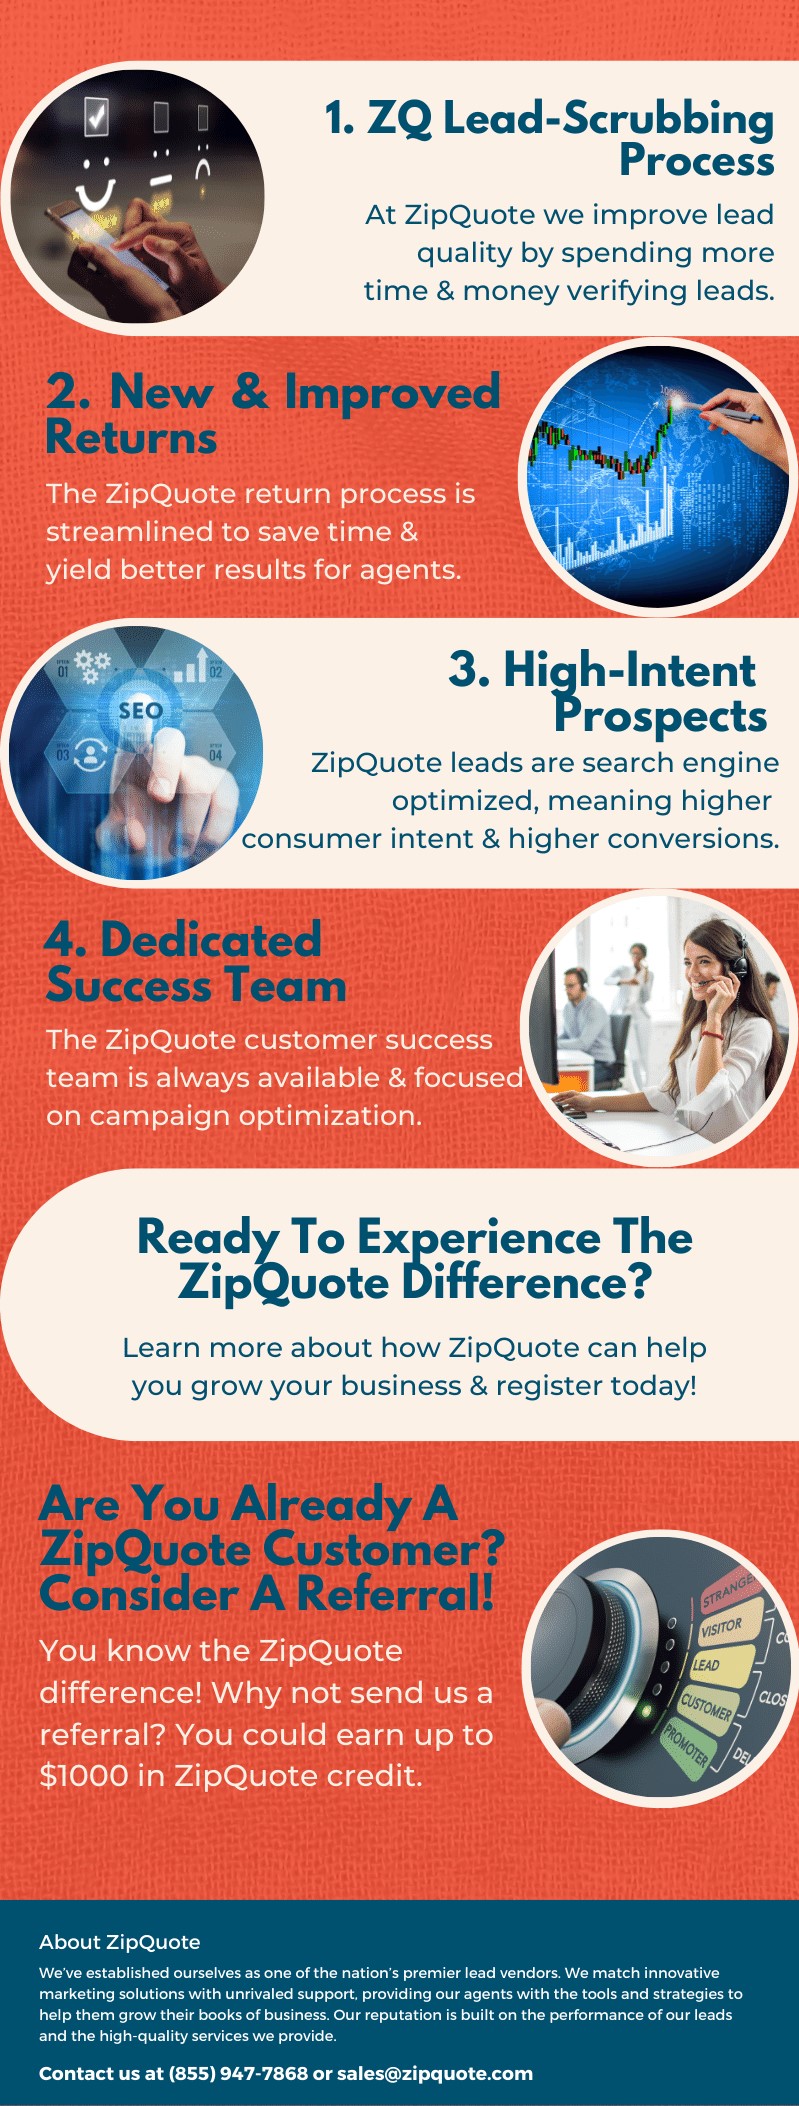 Why Partner With ZipQuote? The ZQ Difference